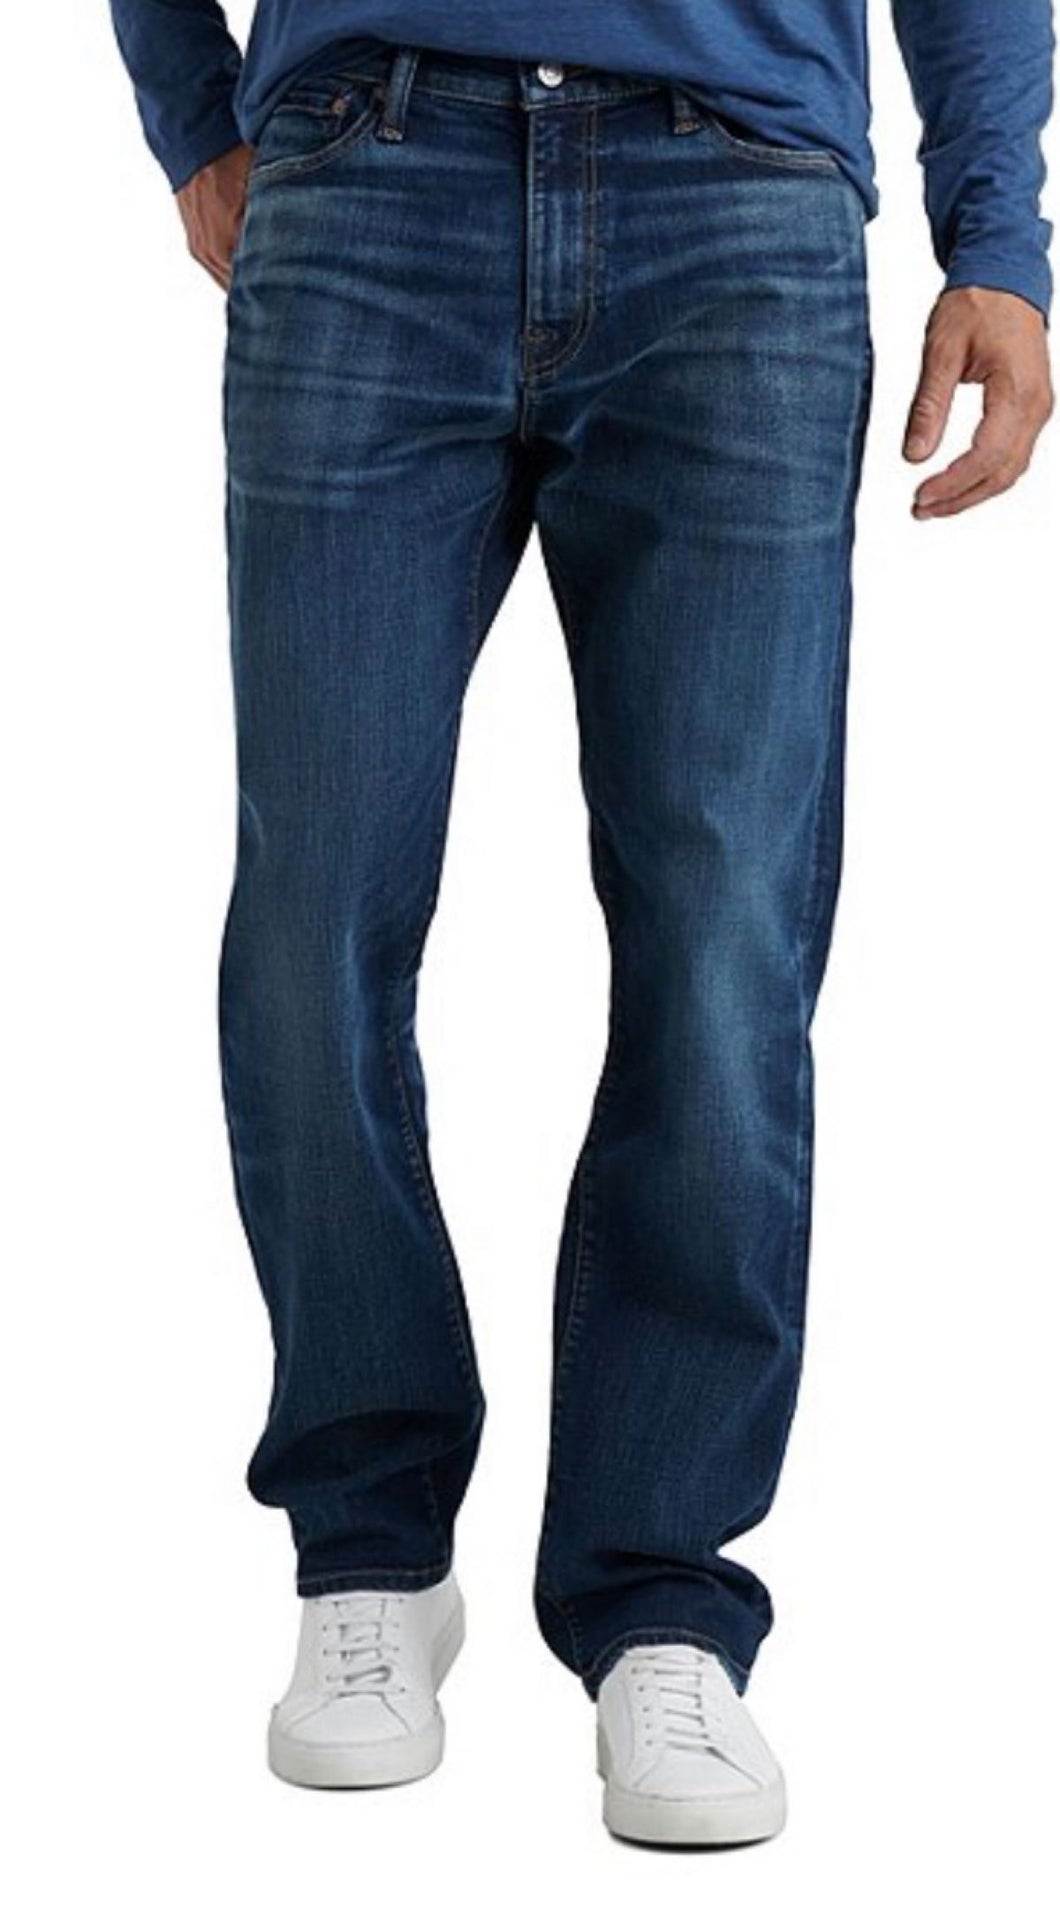 Lucky Brand 410 Athletic Fit Jeans - 30-36 Inseam in Blue for Men